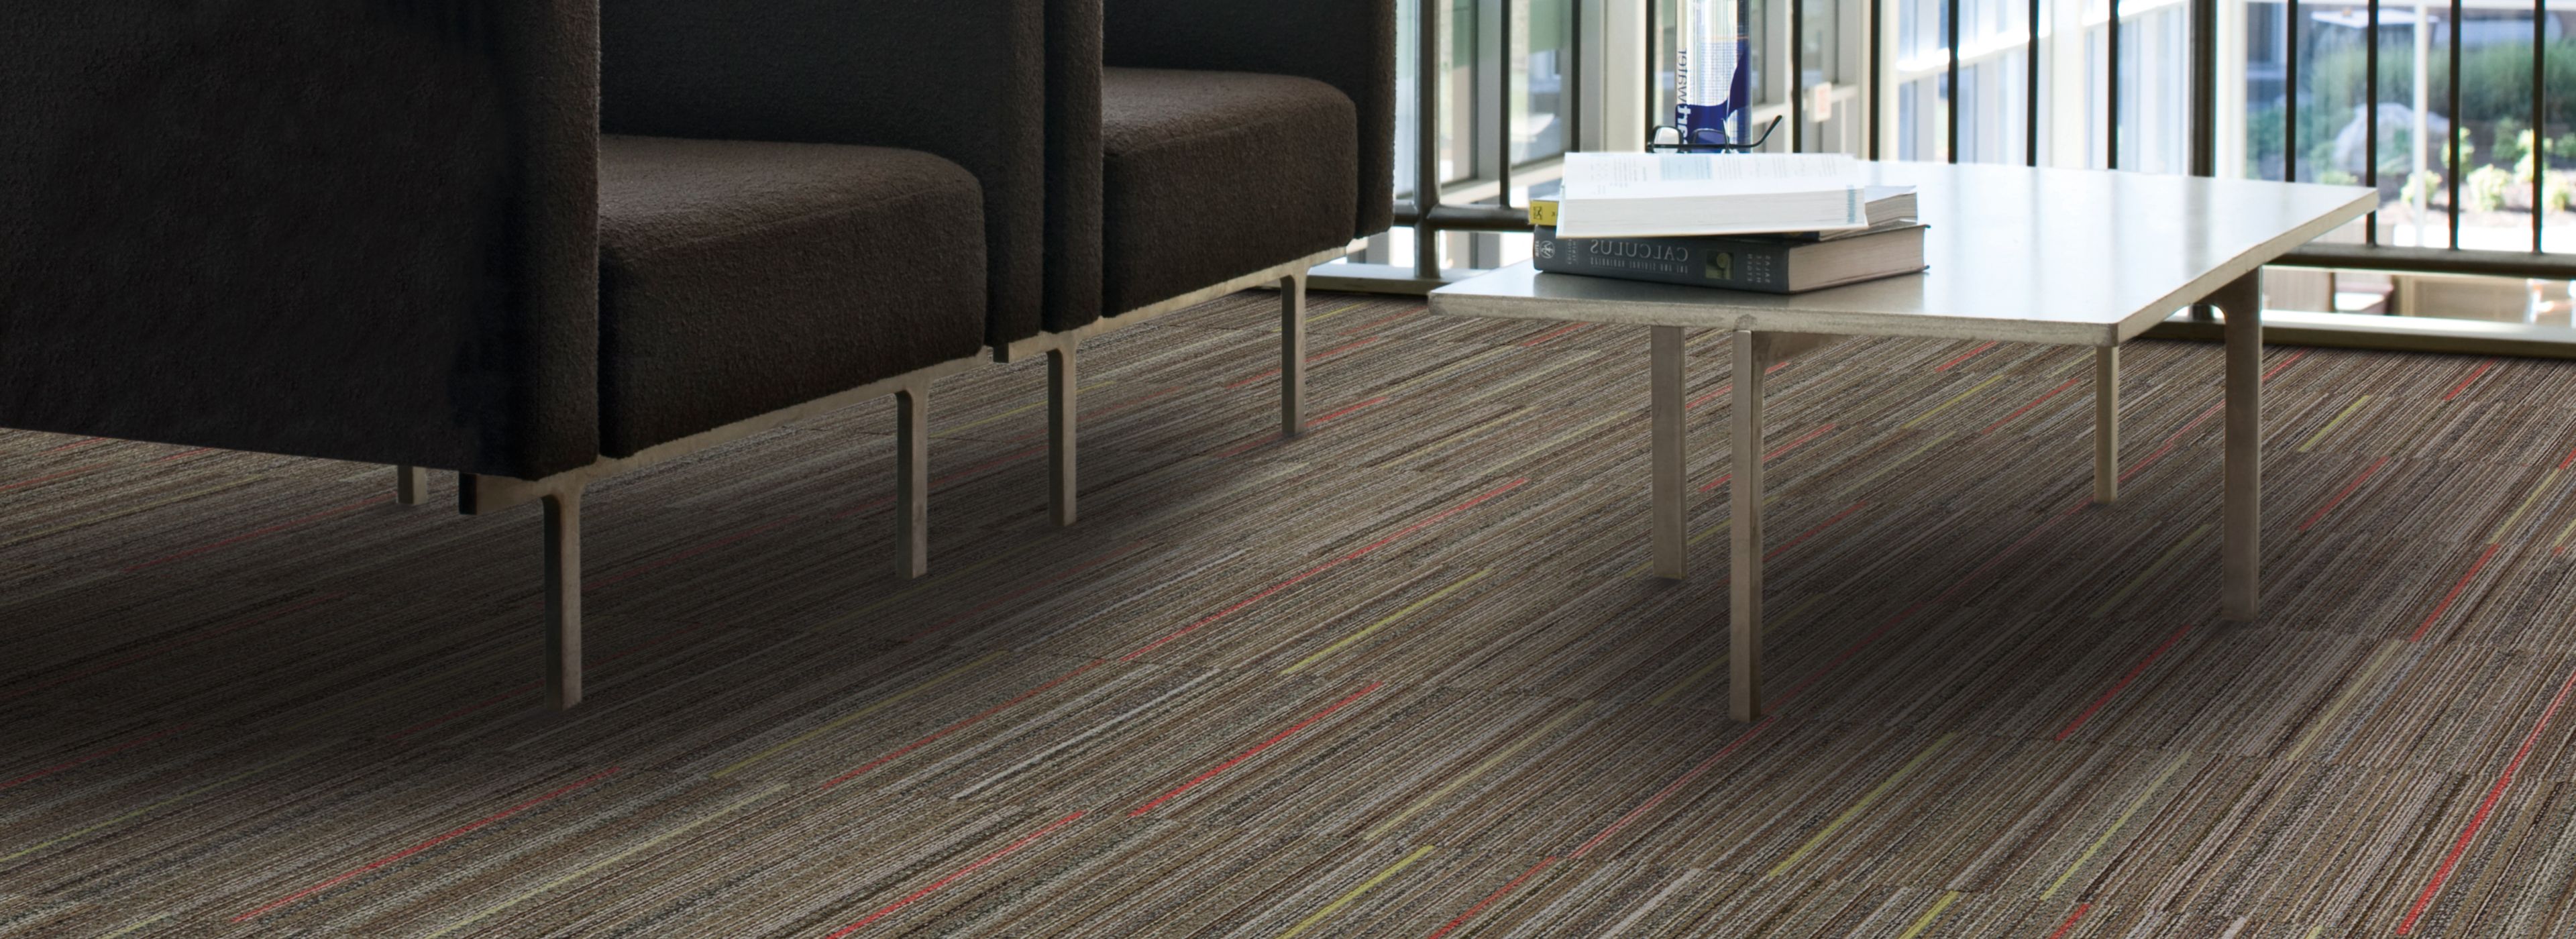 Interface Primary Stitch in seating area with books on table image number 1